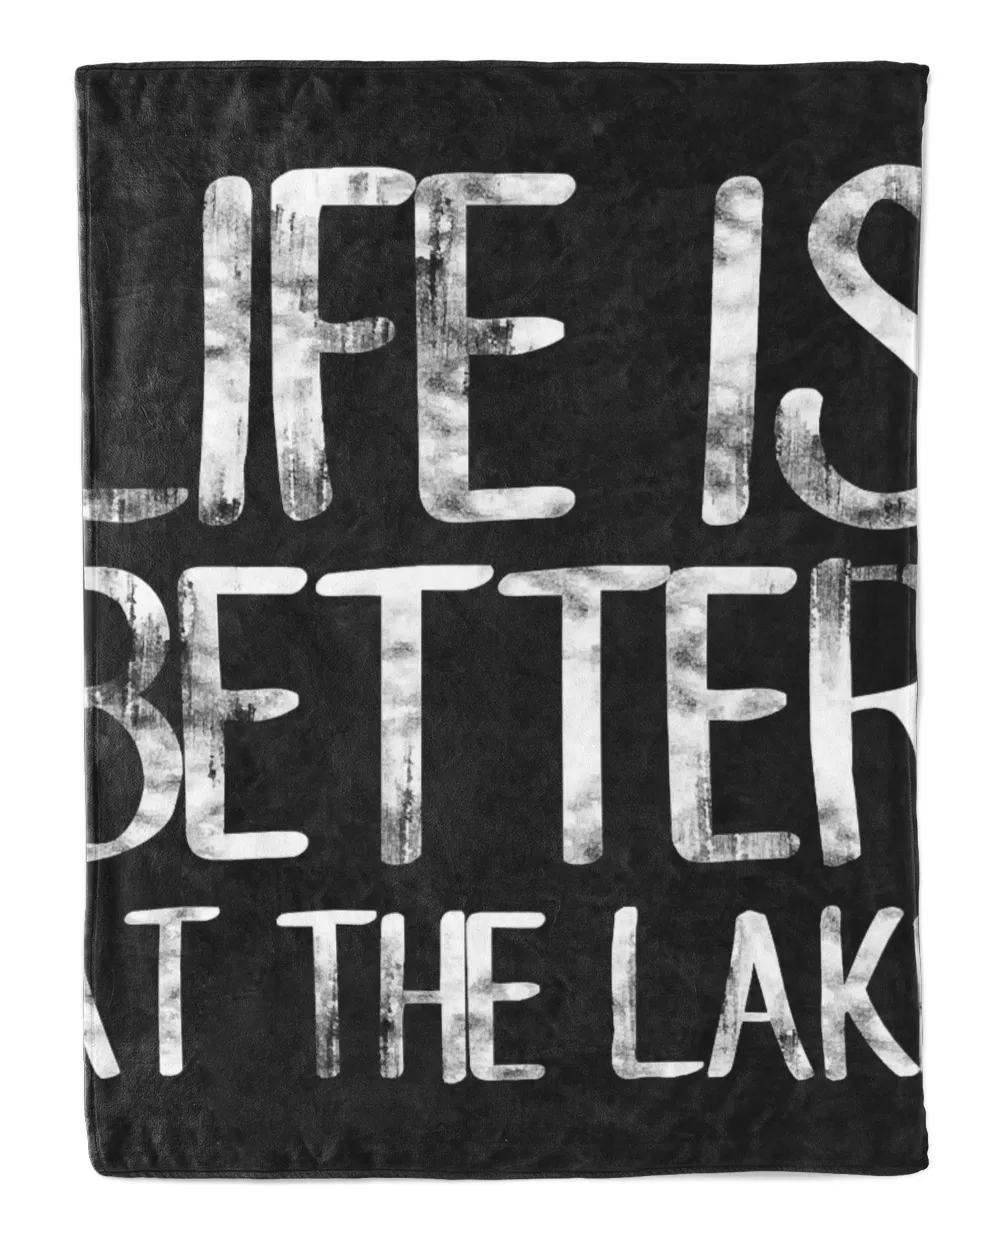 Life Is Better At The Lake T-Shirt Funny Camping Fishing Tee